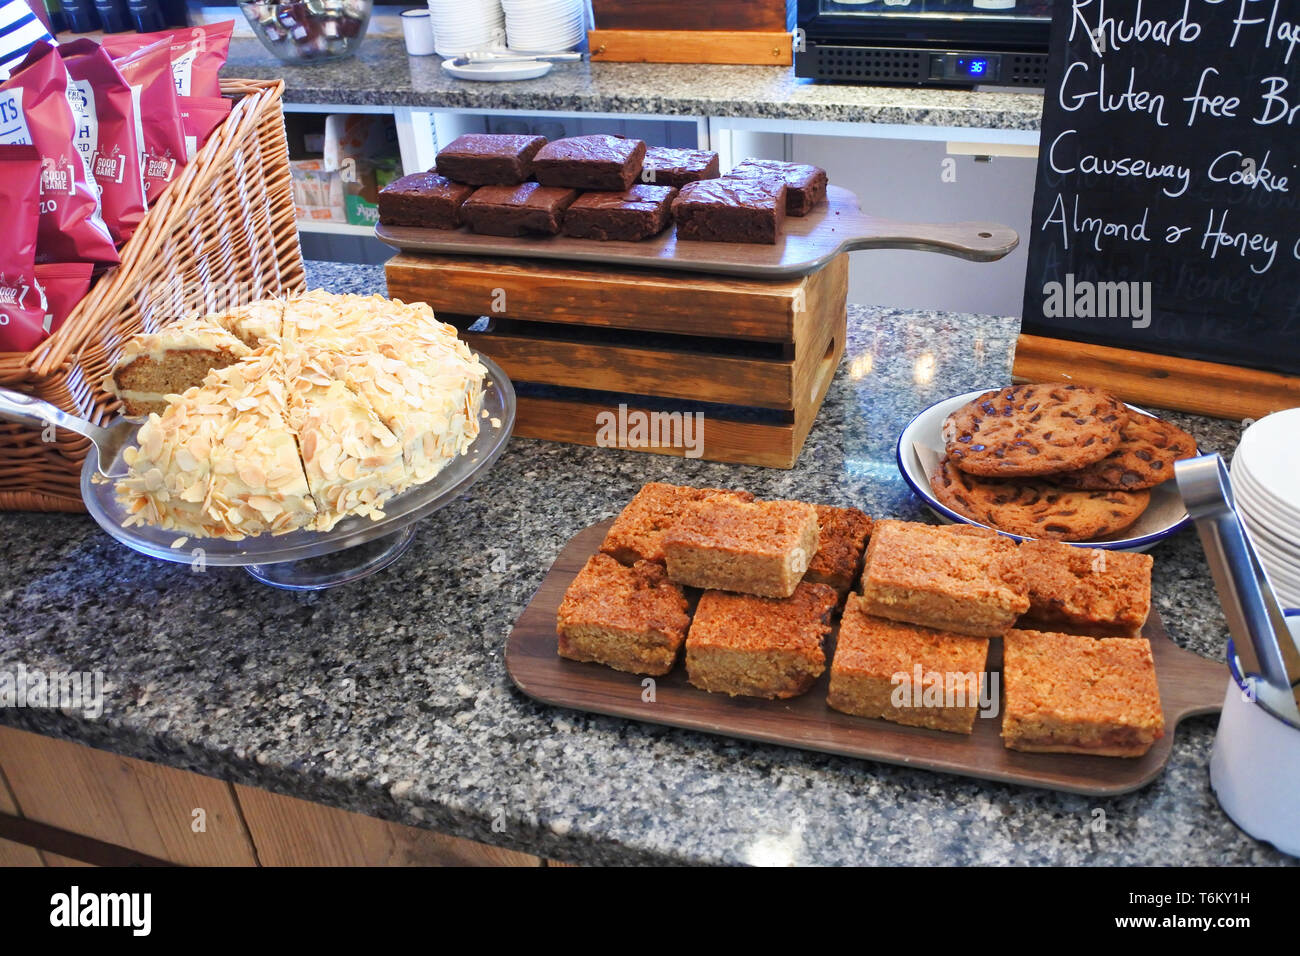 A confectionary display on a counter at a coffee shop, UK - John Gollop Stock Photo